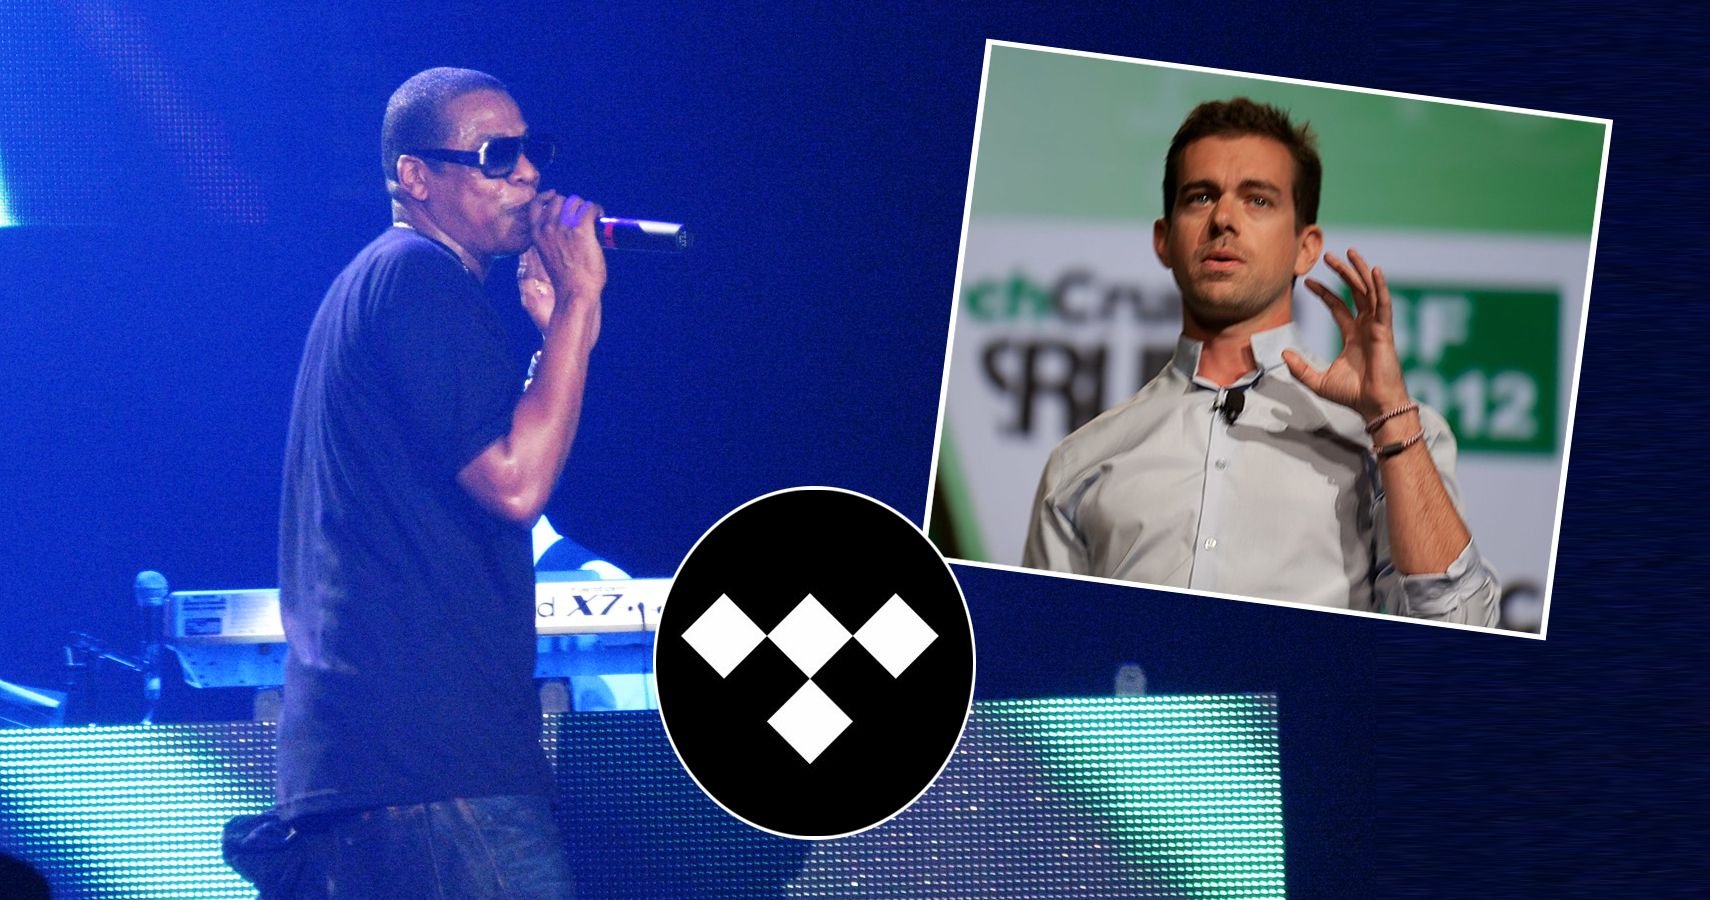 Jay-Z & Twitter CEO Jack Dorsey Discuss Plans For Tidal